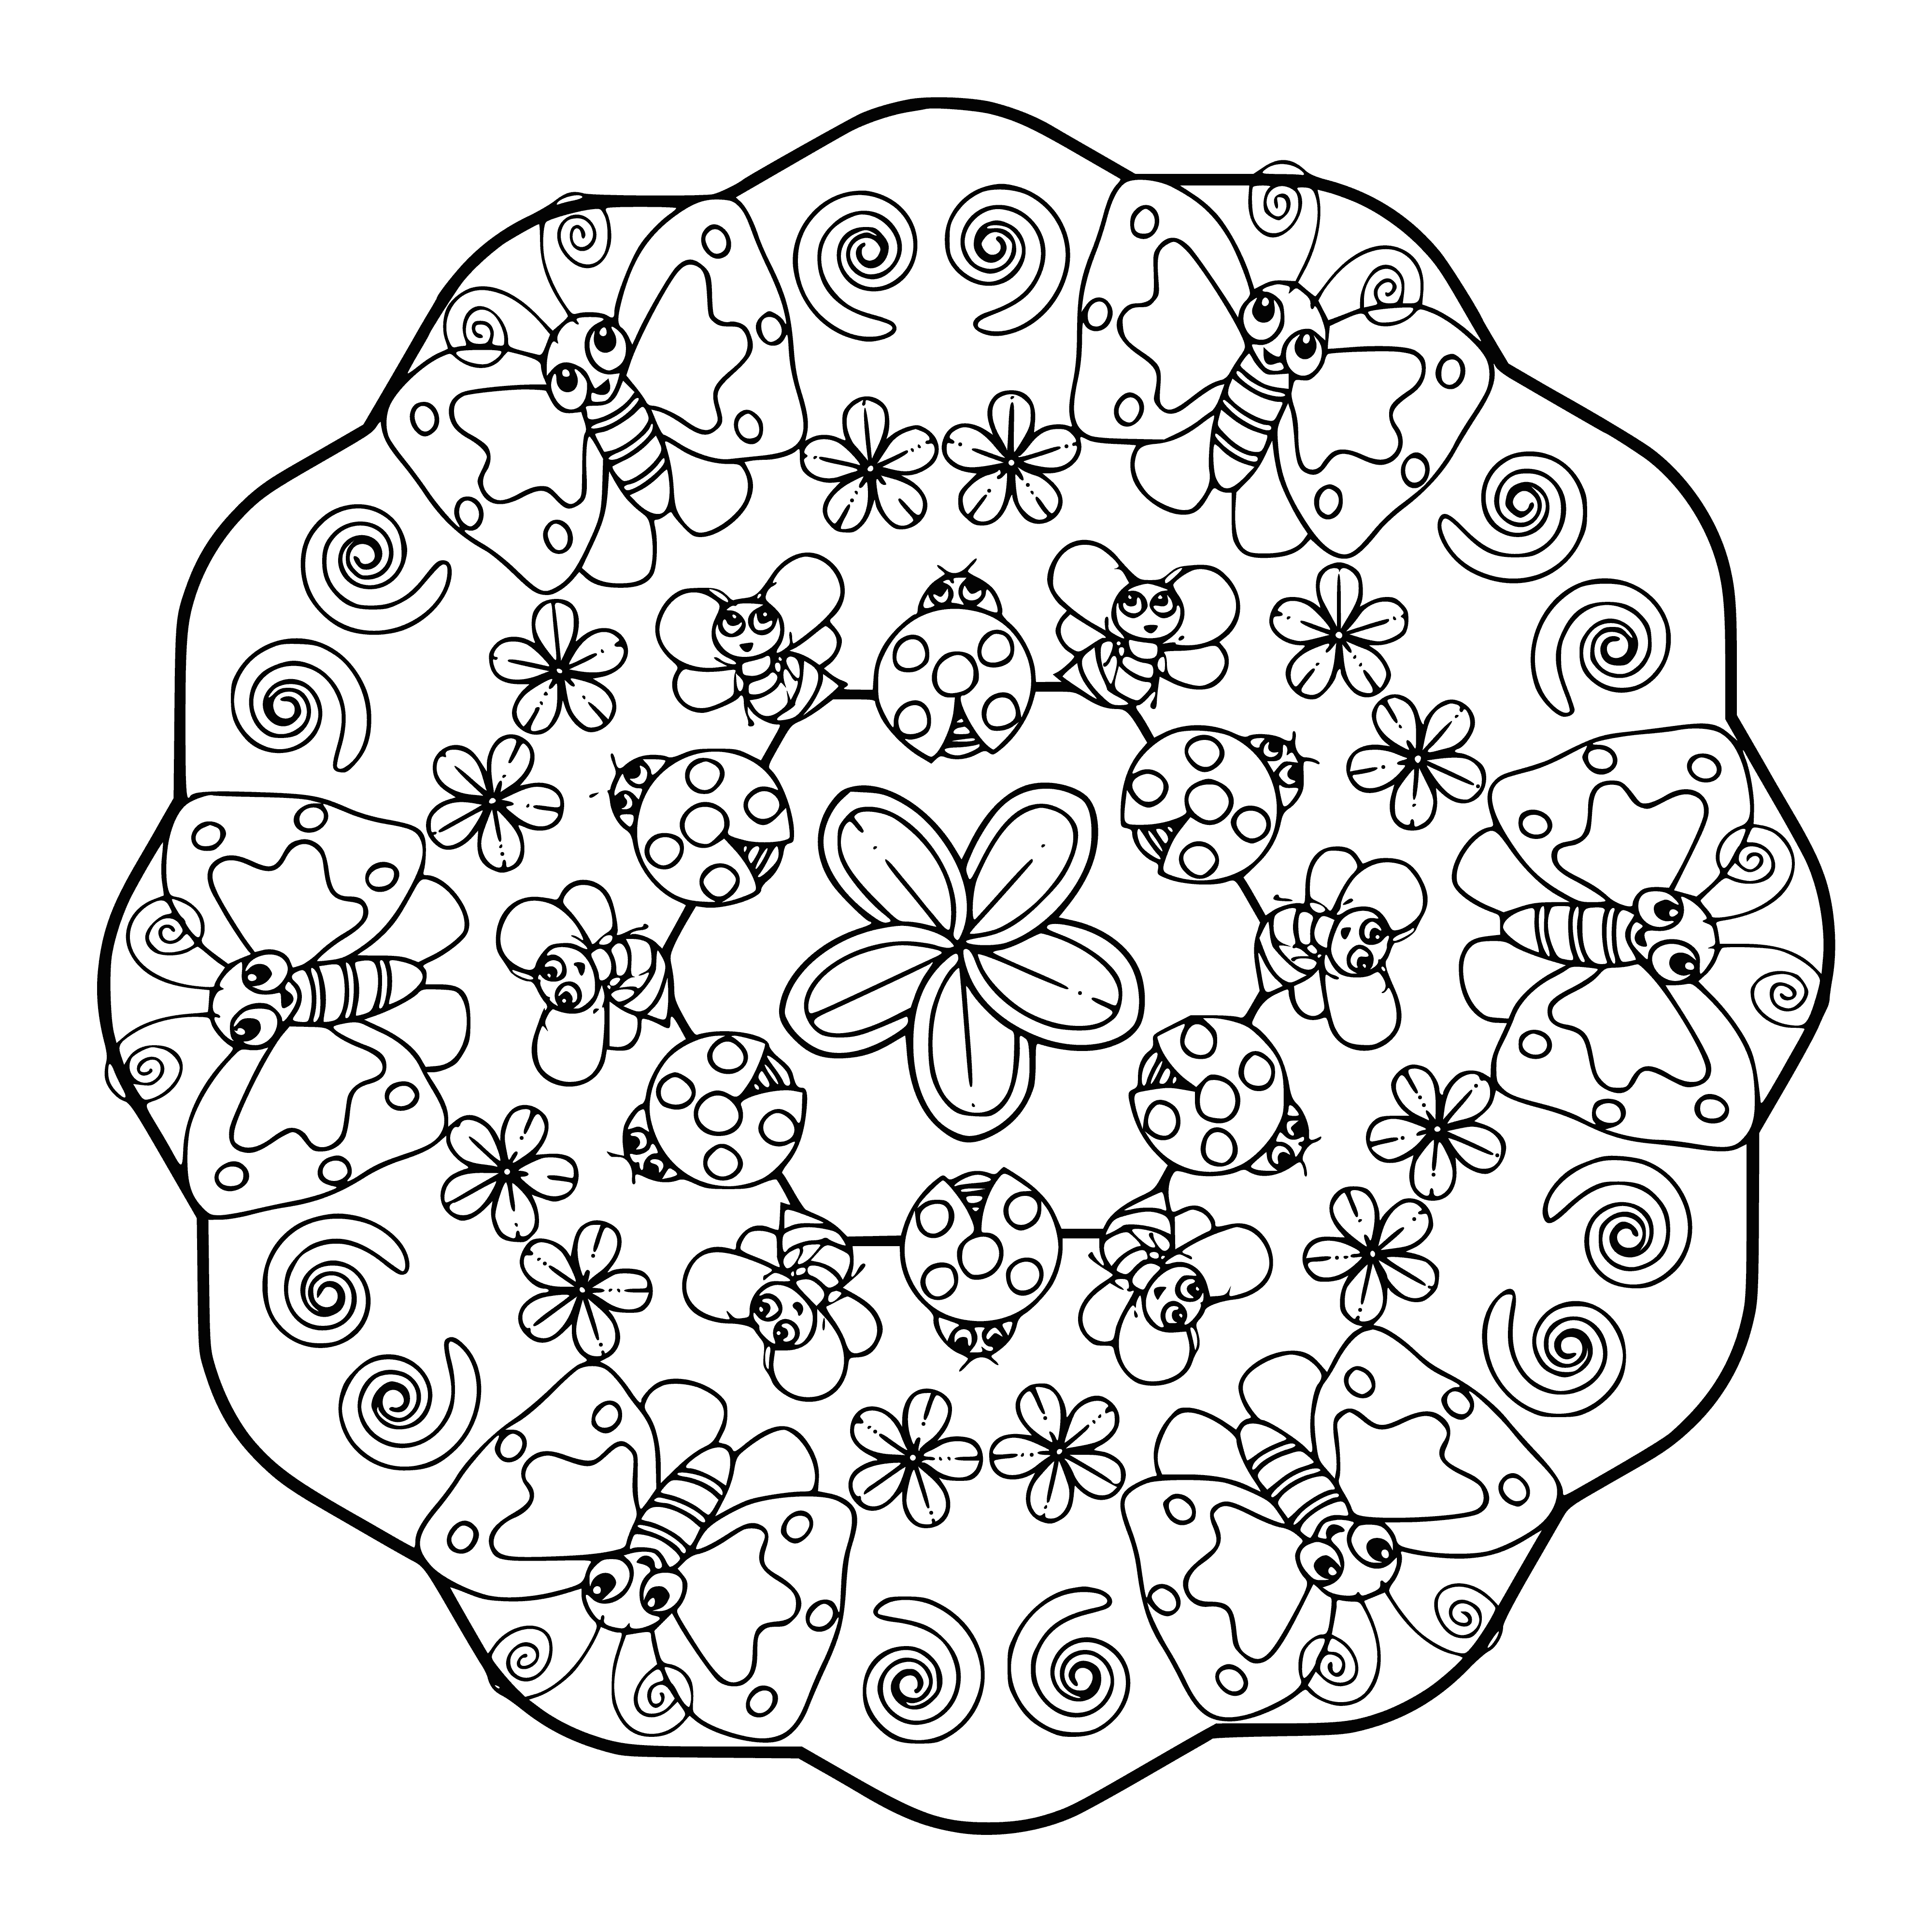 coloring page: Many shapes in bright colors form a mandala w/a central circle & other circles around it. Triangles, diamonds & more make it vibrant & unique.